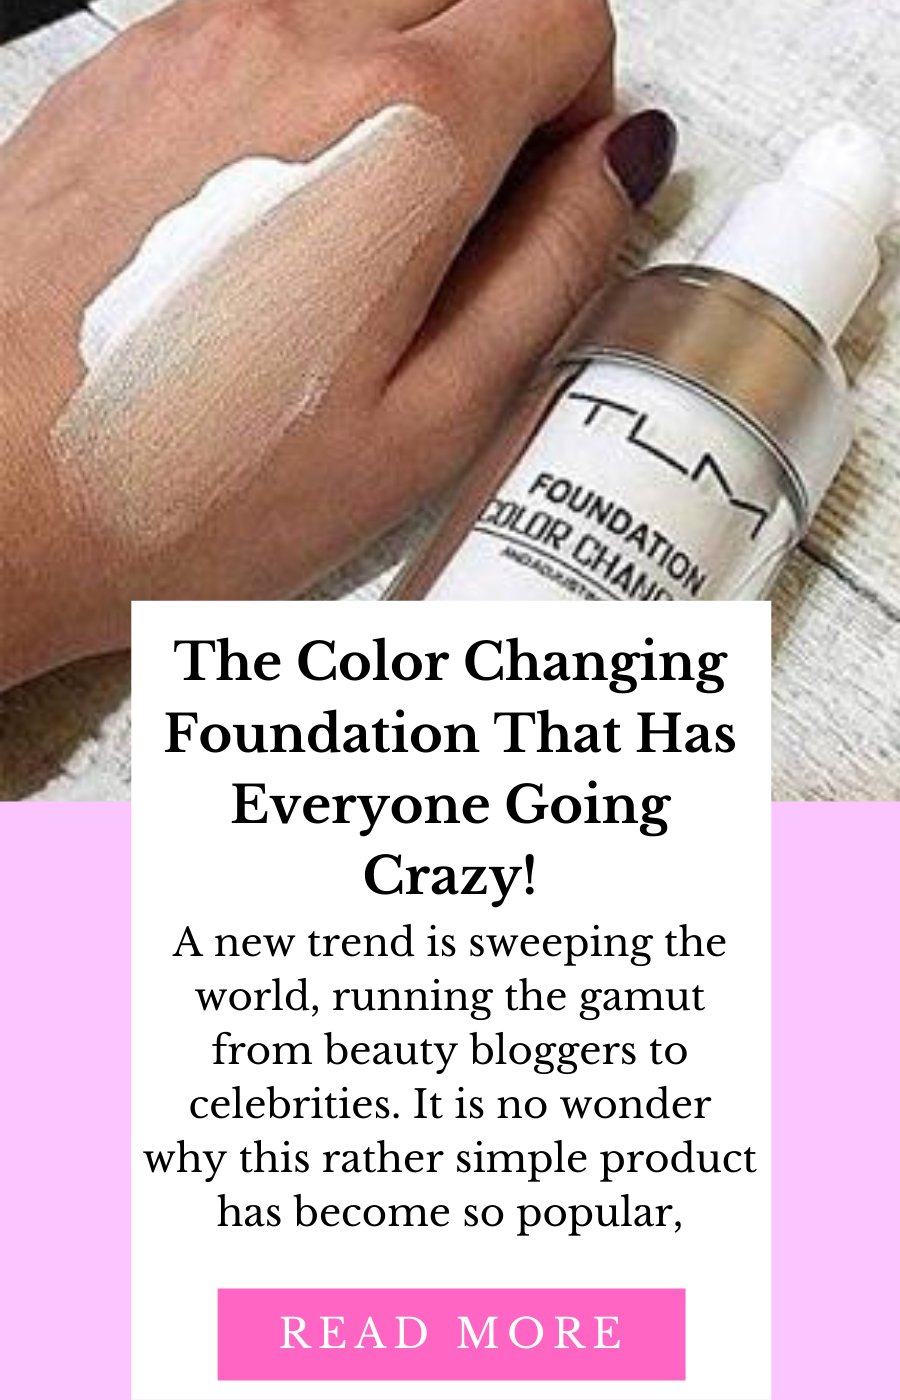 The Color Changing Foundation That Has Everyone Going Crazy! - TGC Boutique